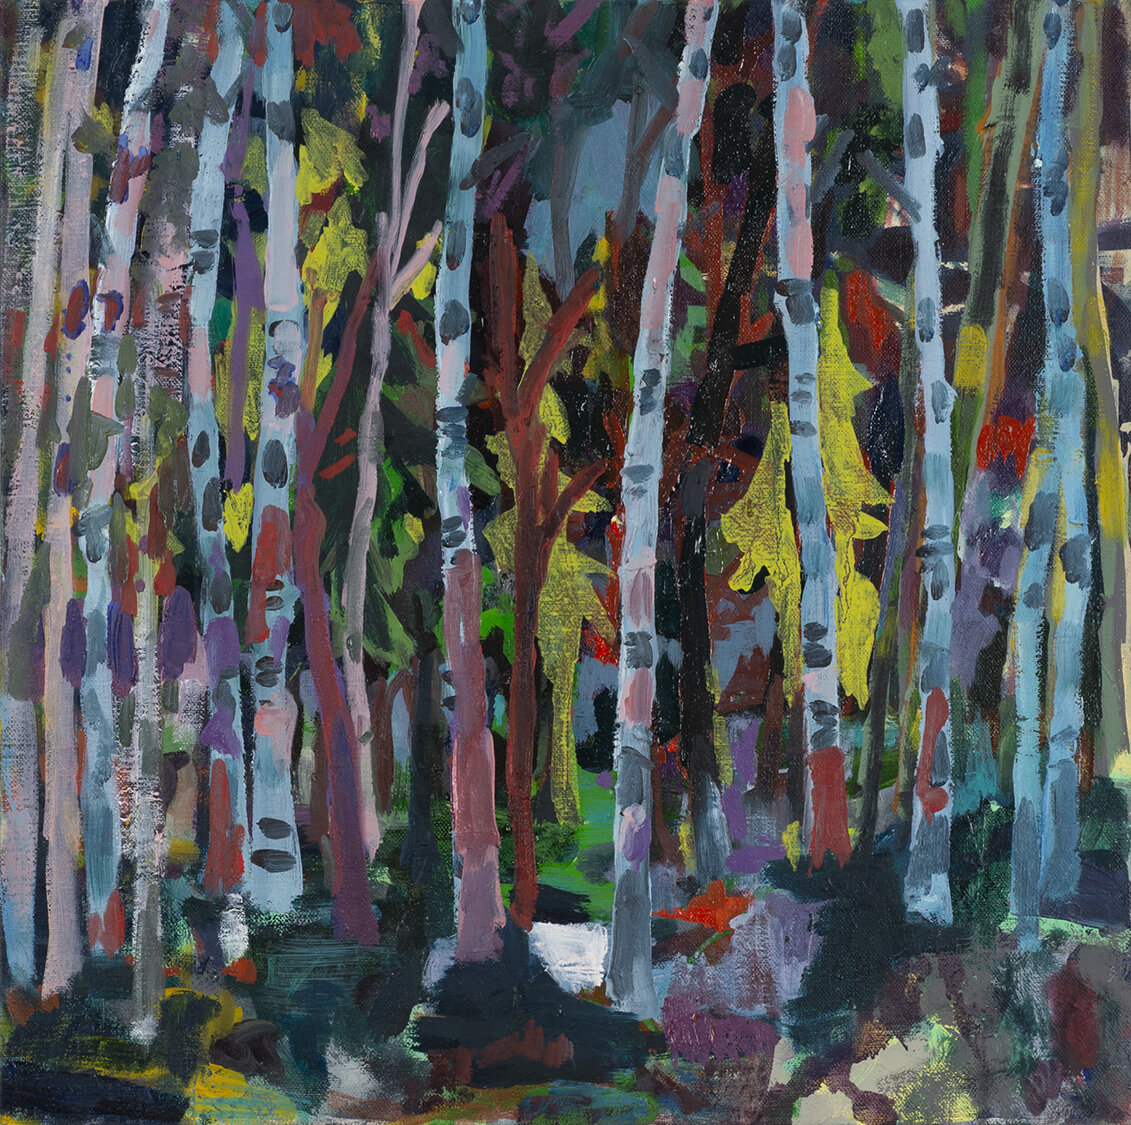   Forest Study , 2020, oil on linen, 16 in. x 16 in. 